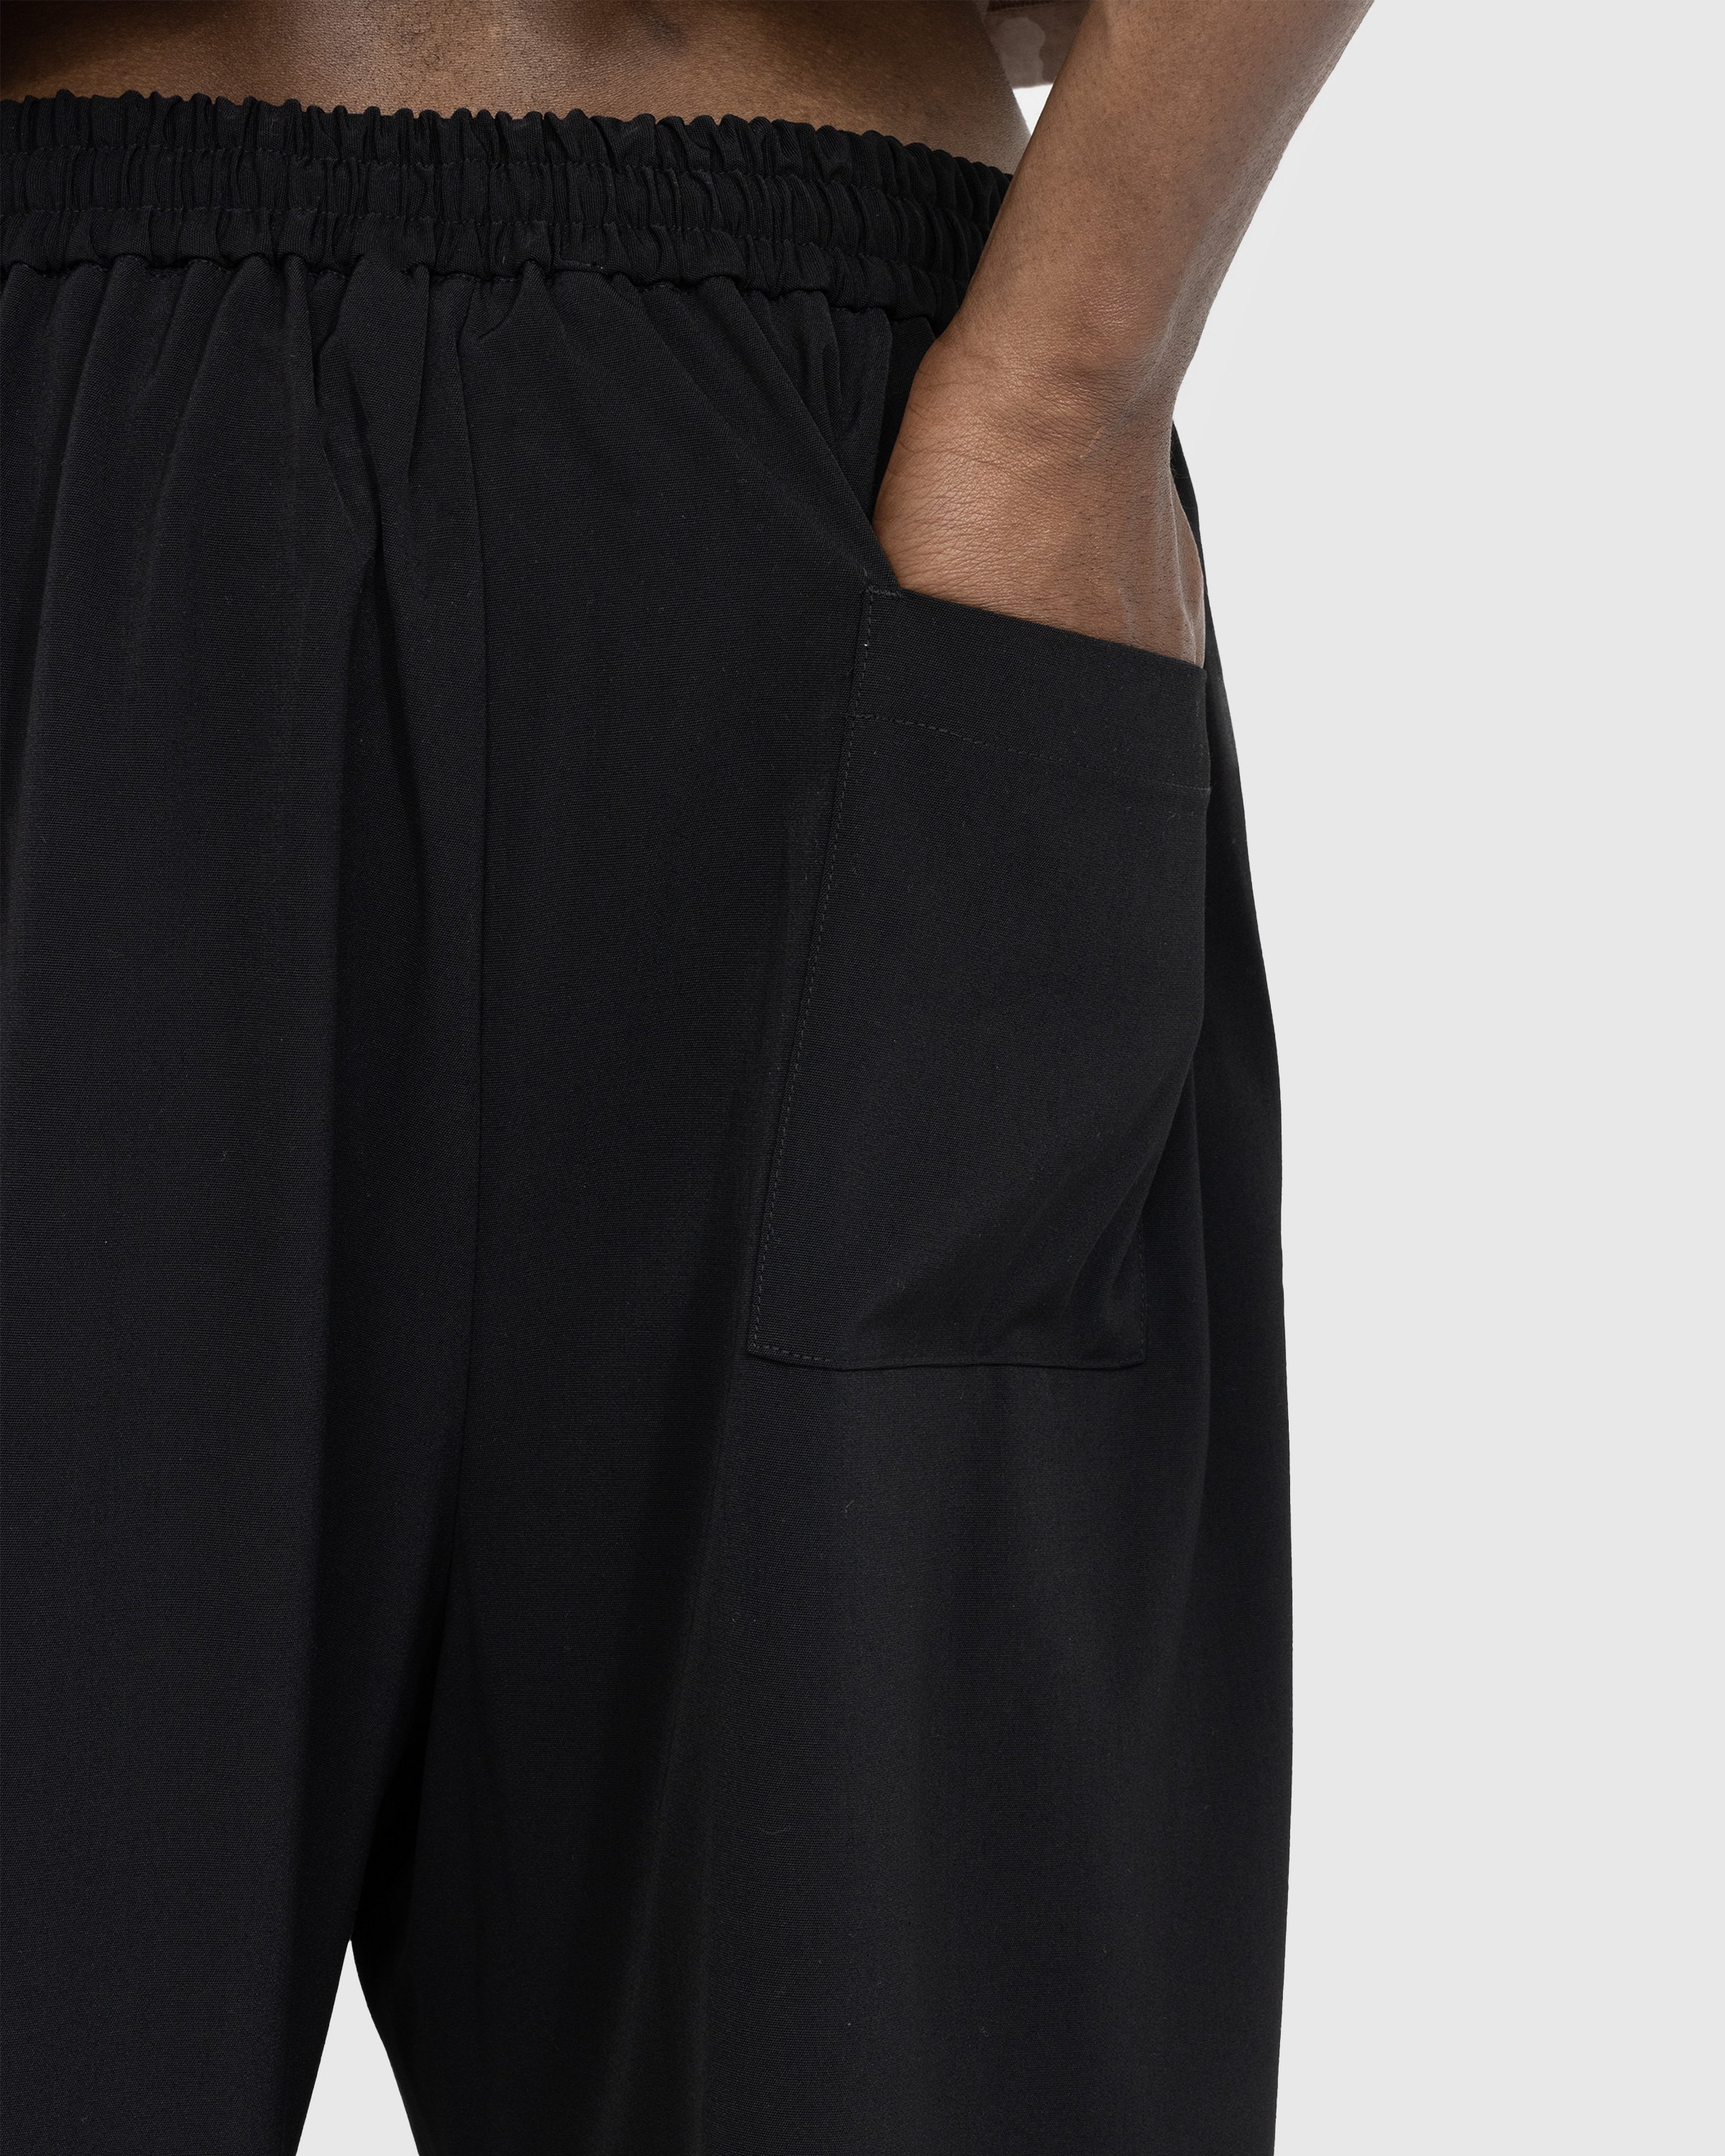 Acne Studios - Relaxed Fit Trousers Black - Clothing - Black - Image 4